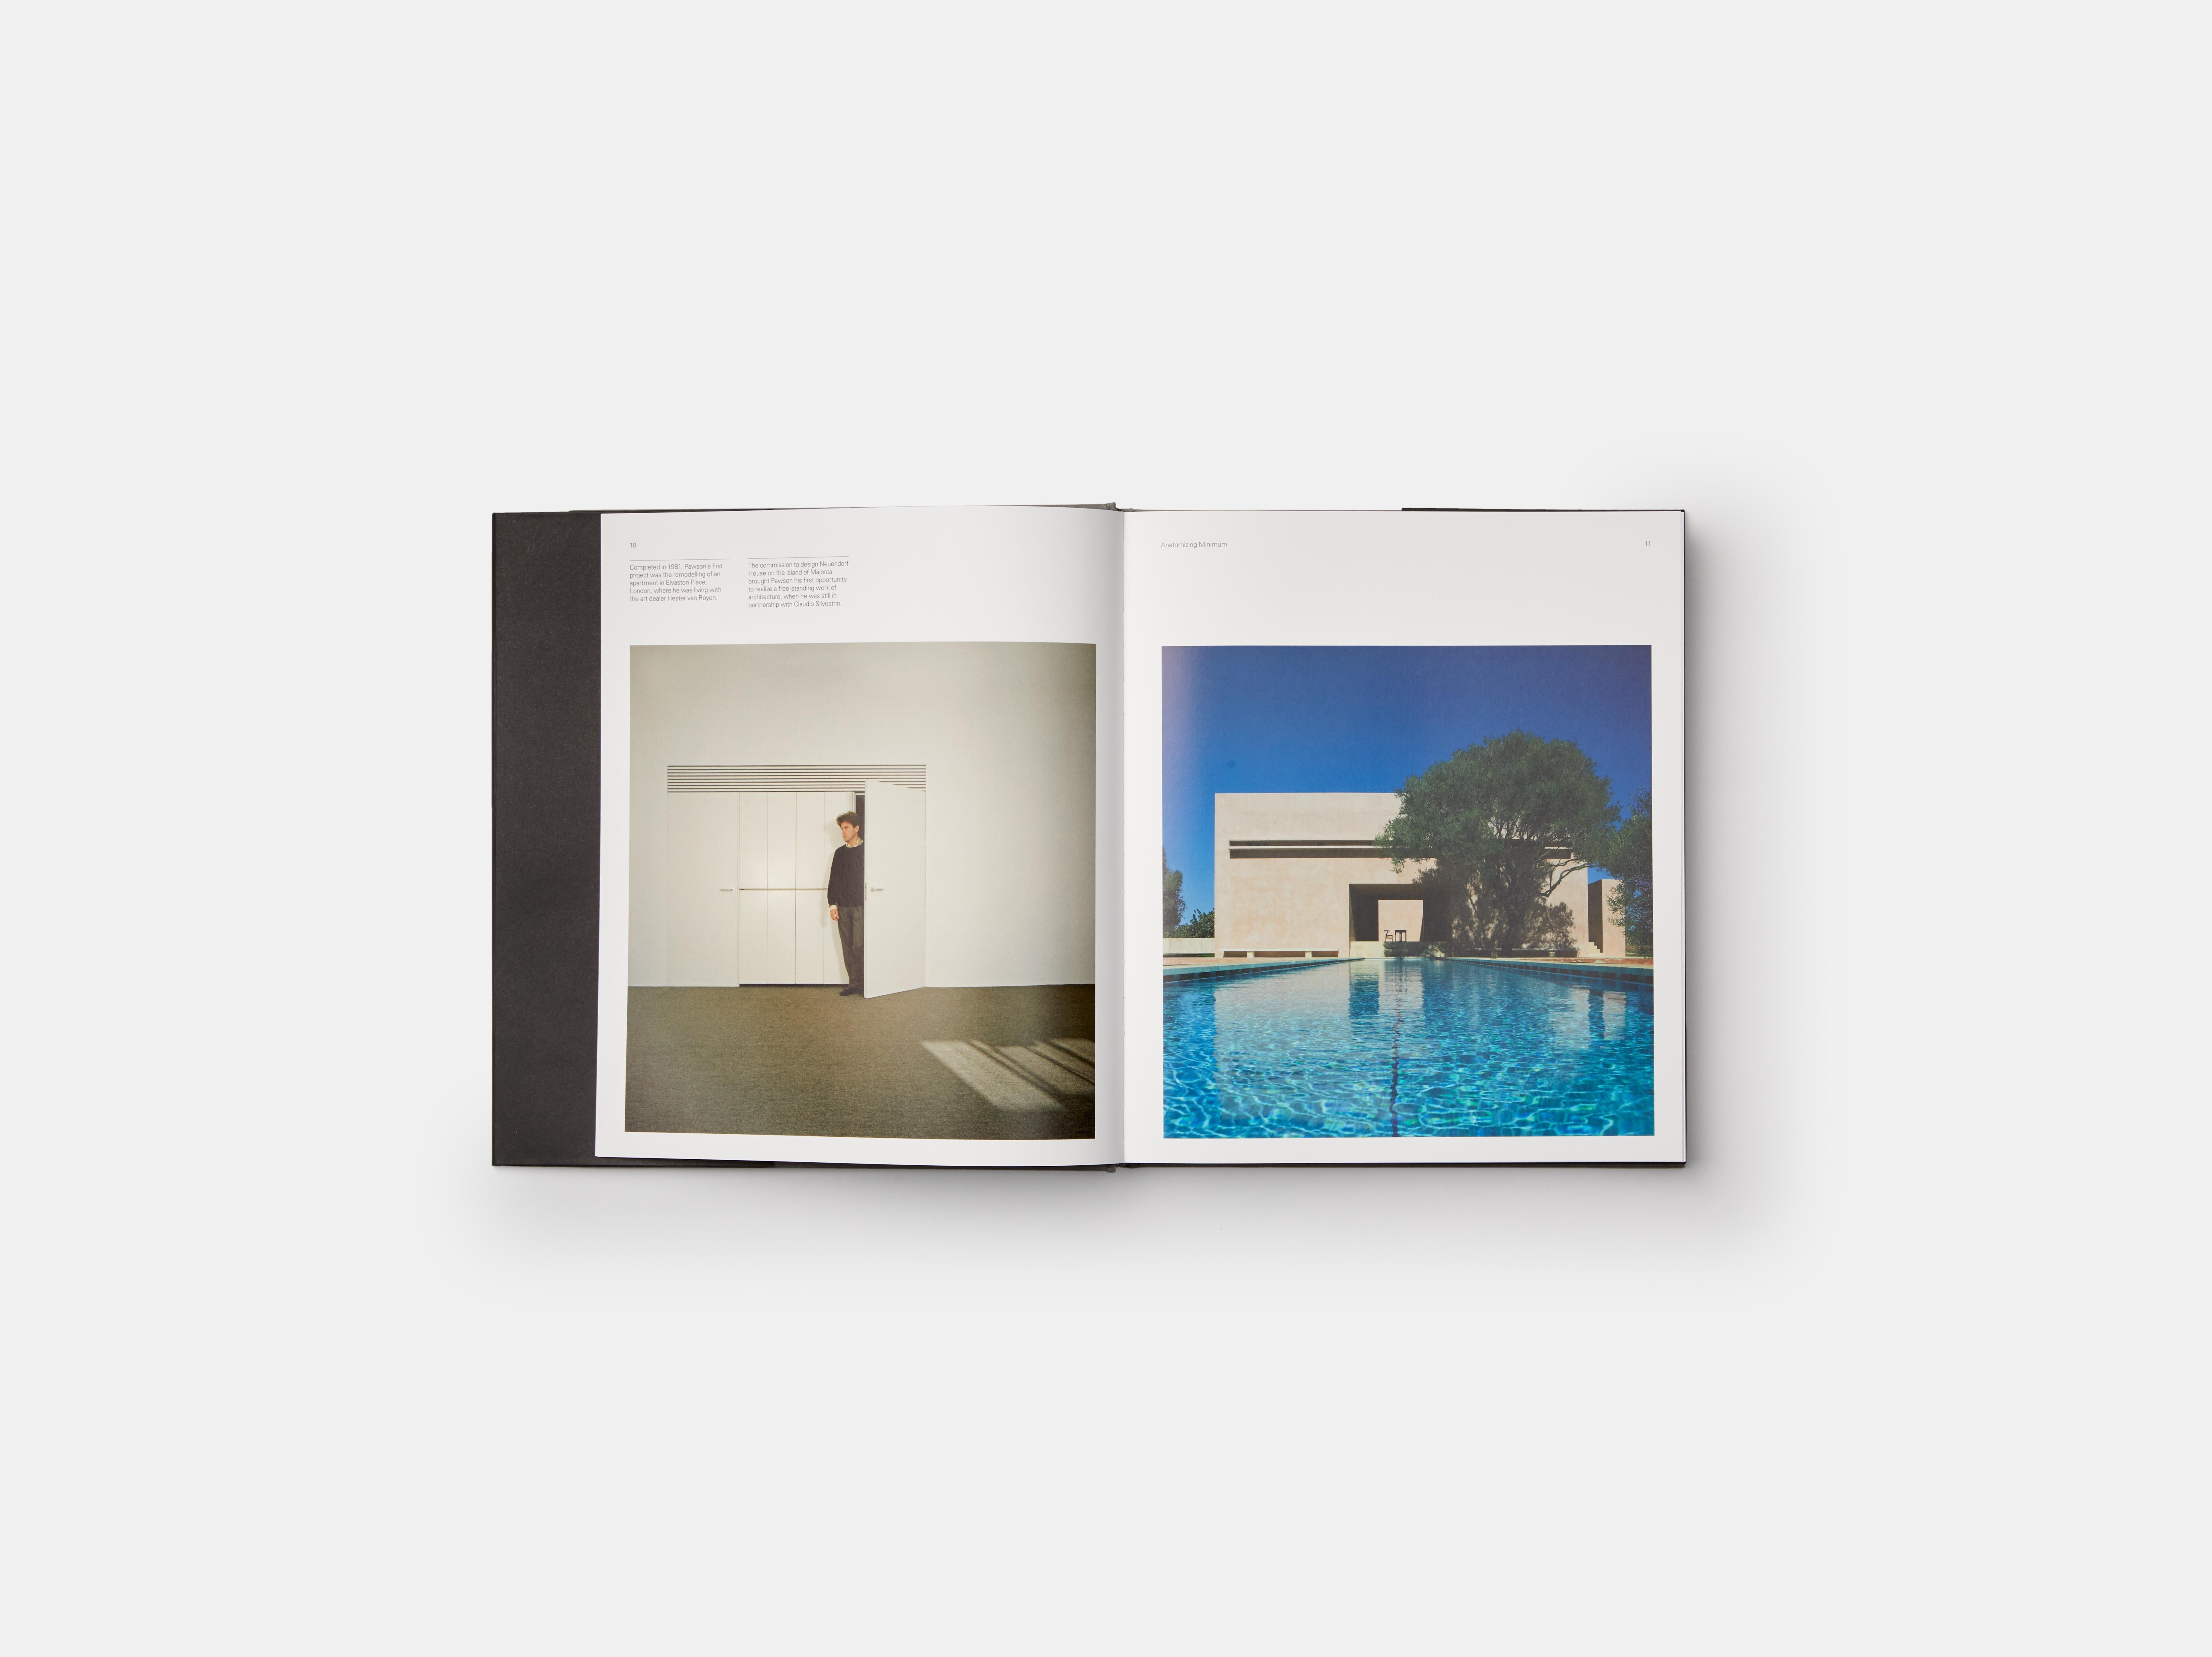 A powerful new monograph showcasing the defining elements and architectural anatomy at the very heart of Pawson's work

This monograph, the latest volume in Phaidon's documentation of John Pawson's stellar career, hones in on the essential details